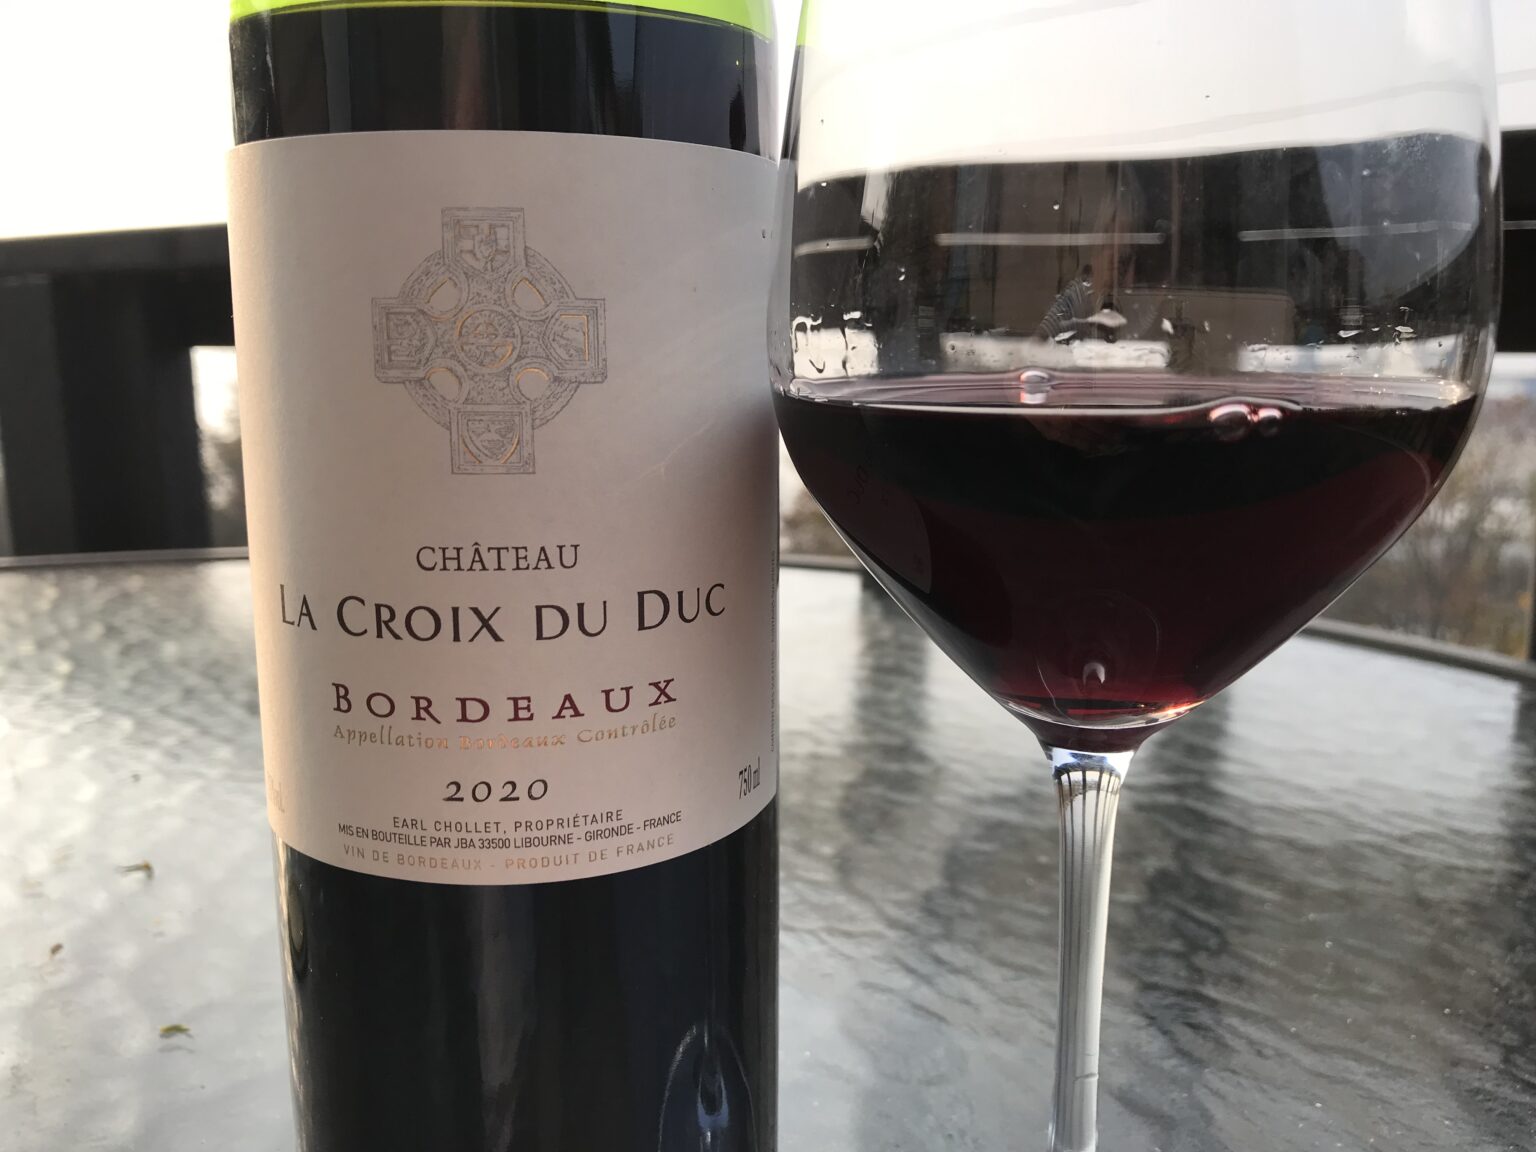 Bordeaux is a region that produces a lot of wine designed for everyday drinking